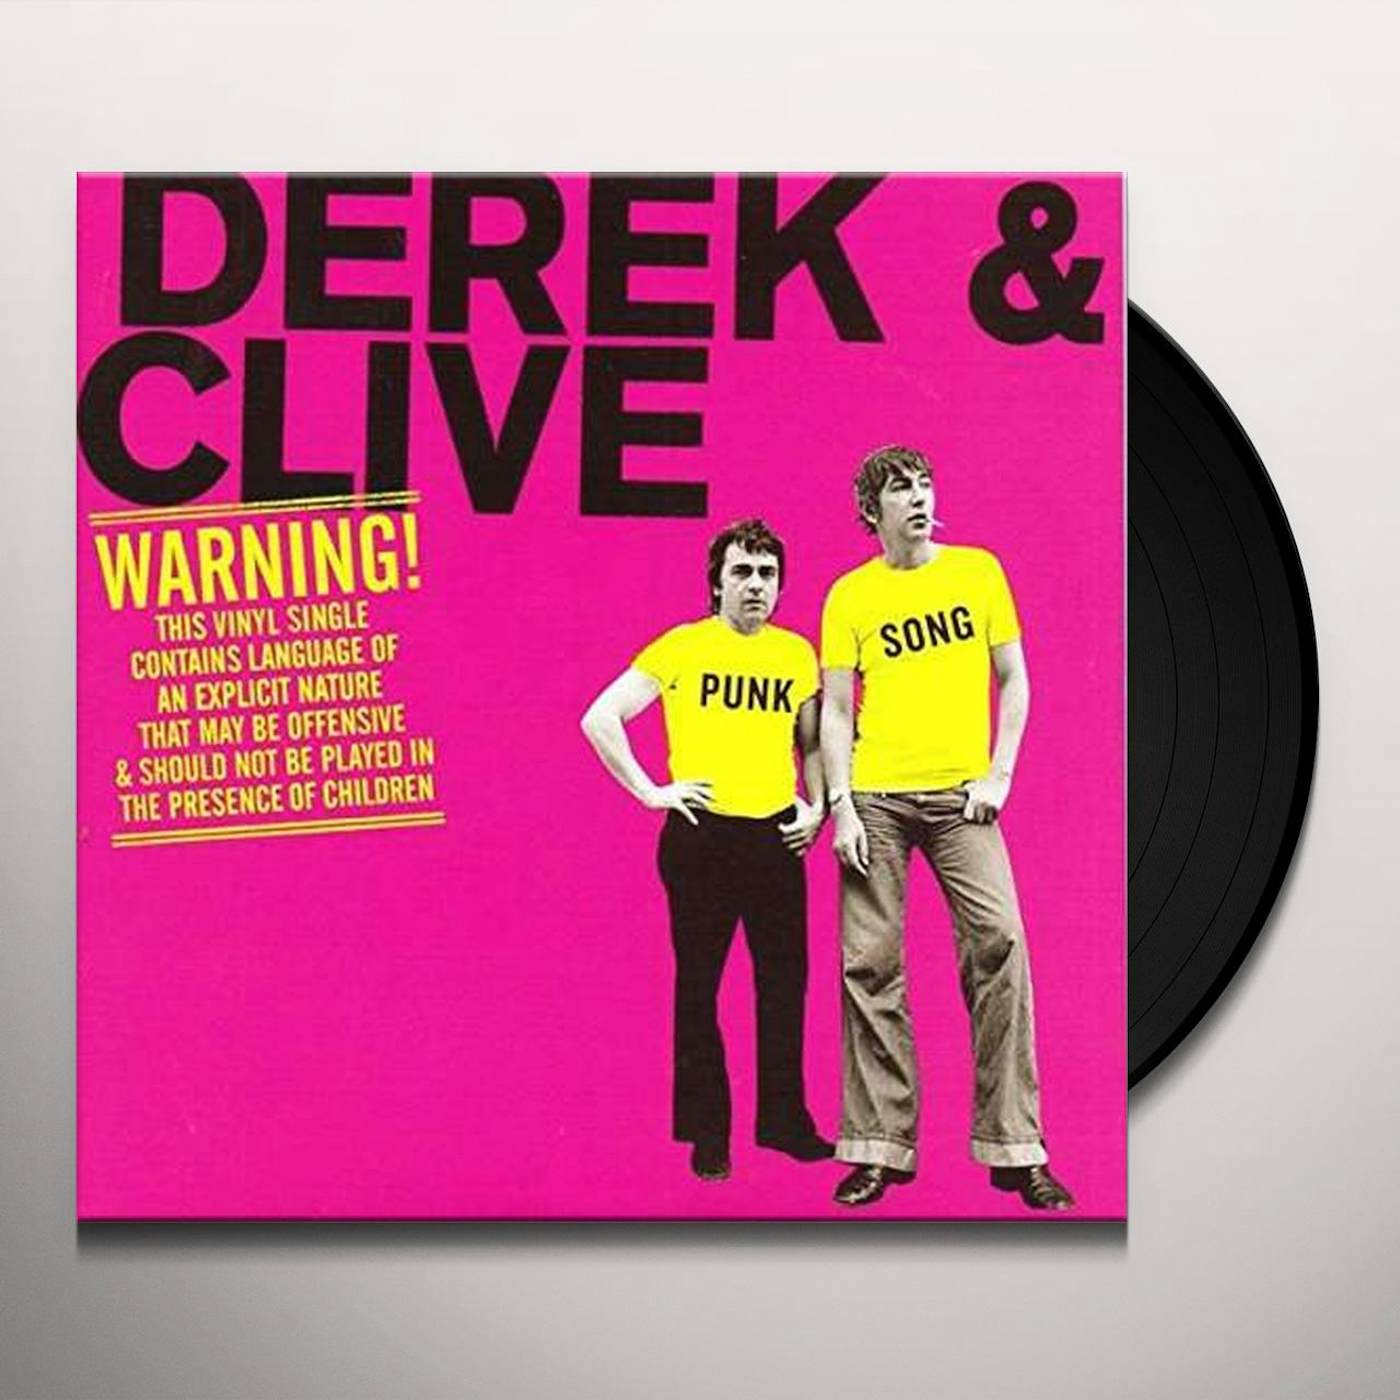 Derek & Clive PUNK SONG/THIS BLOKE CAME UP TO ME/NURSE Vinyl Record